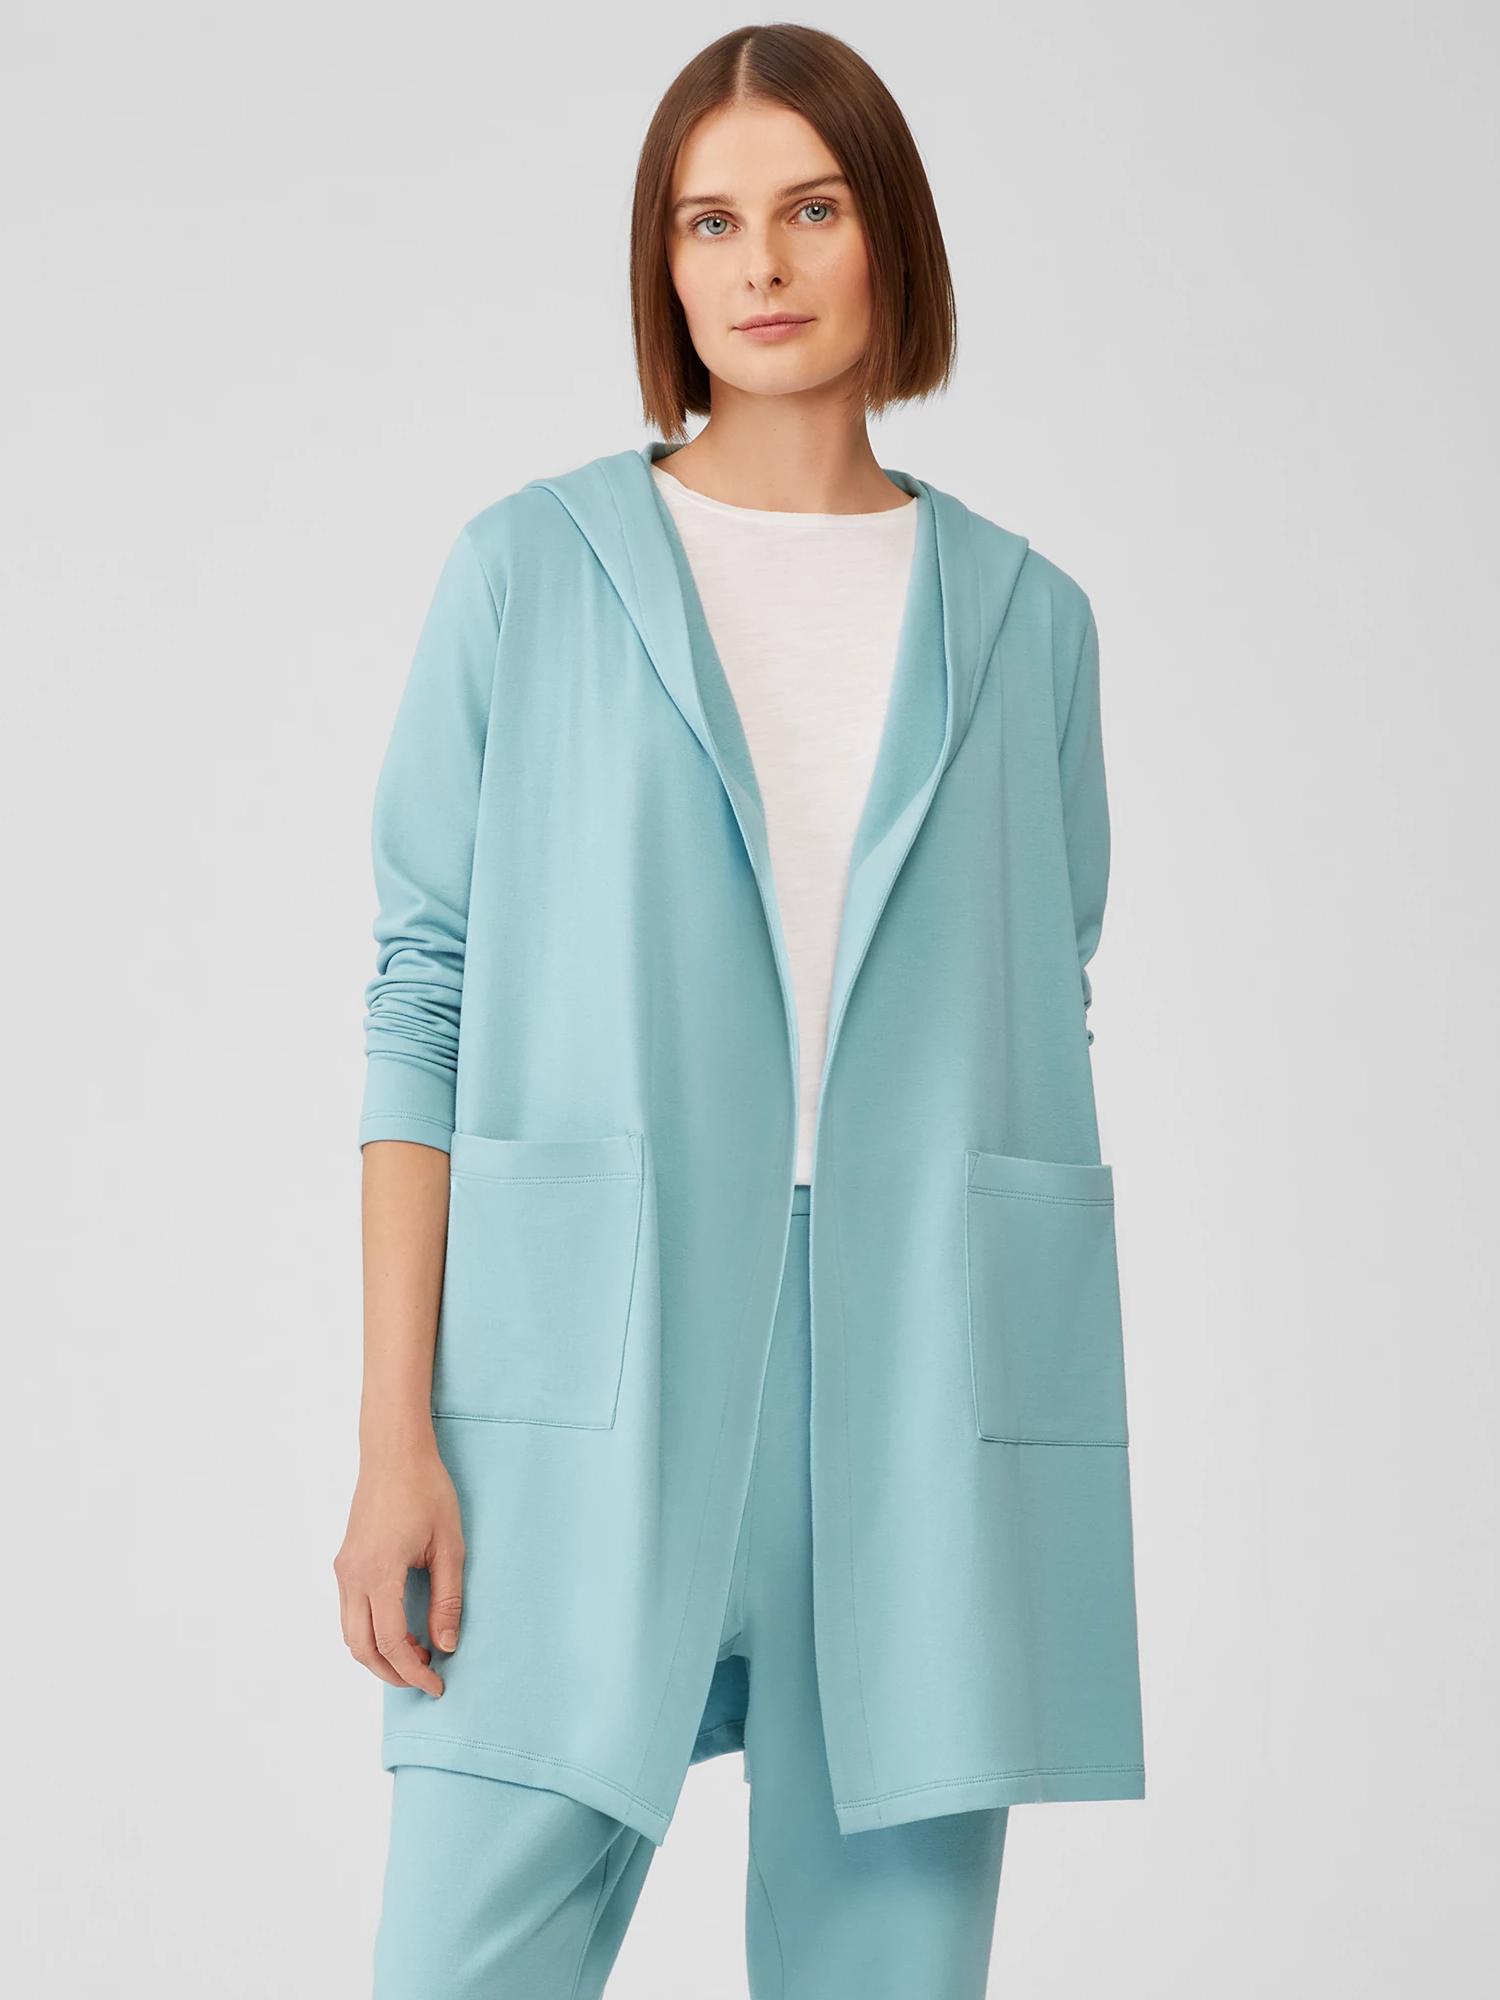 Eileen Fisher Cozy Brushed Terry Hug Hooded Jacket in Blue | Lyst